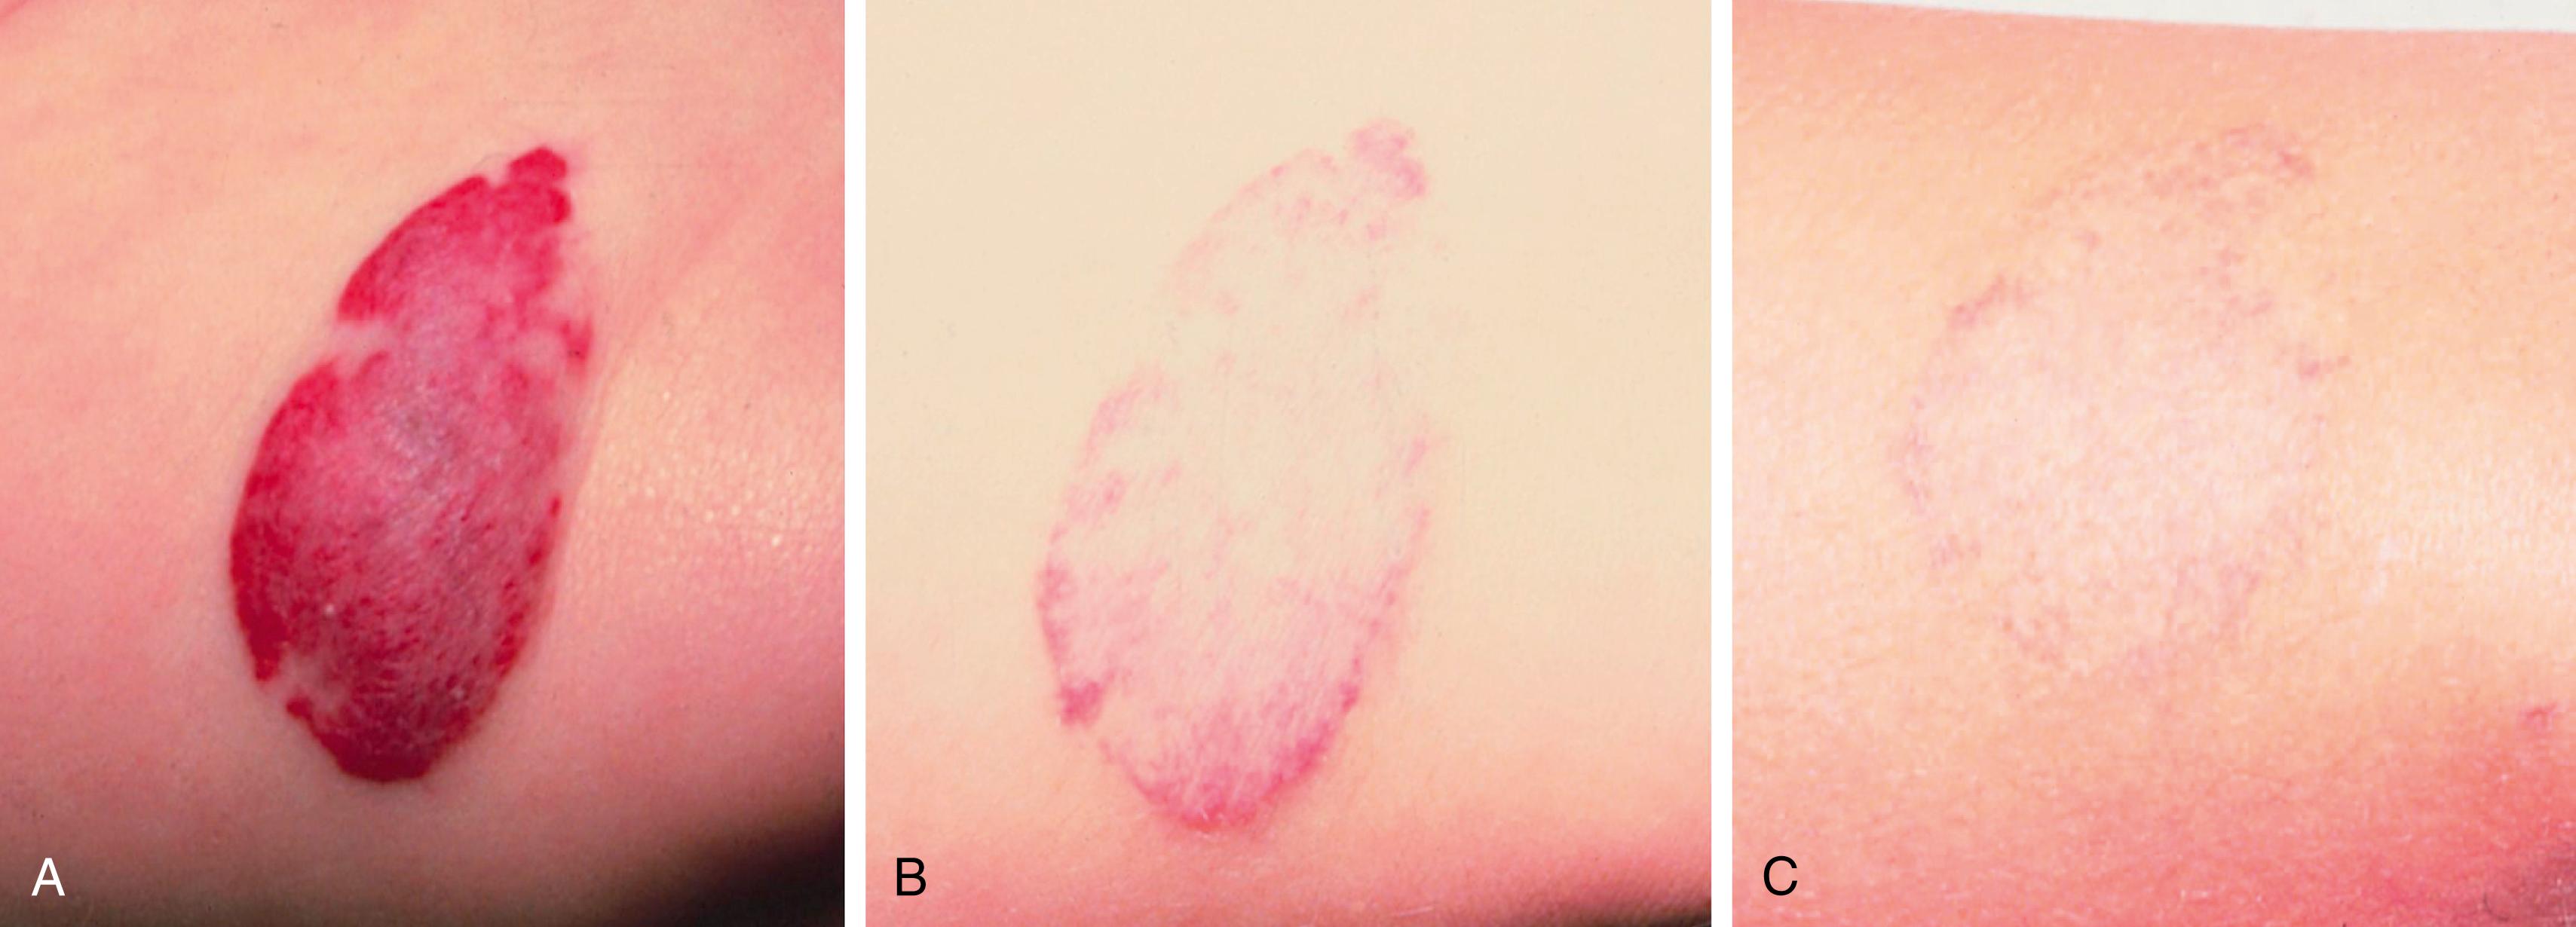 Fig. 10.6, Natural history of hemangioma. After growing for approximately 6 months, hemangiomas tend to plateau in size and then gradually involute. The appearance at 5 months old (A), at 2 years old (B), and almost total resolution at 5 years old (C).